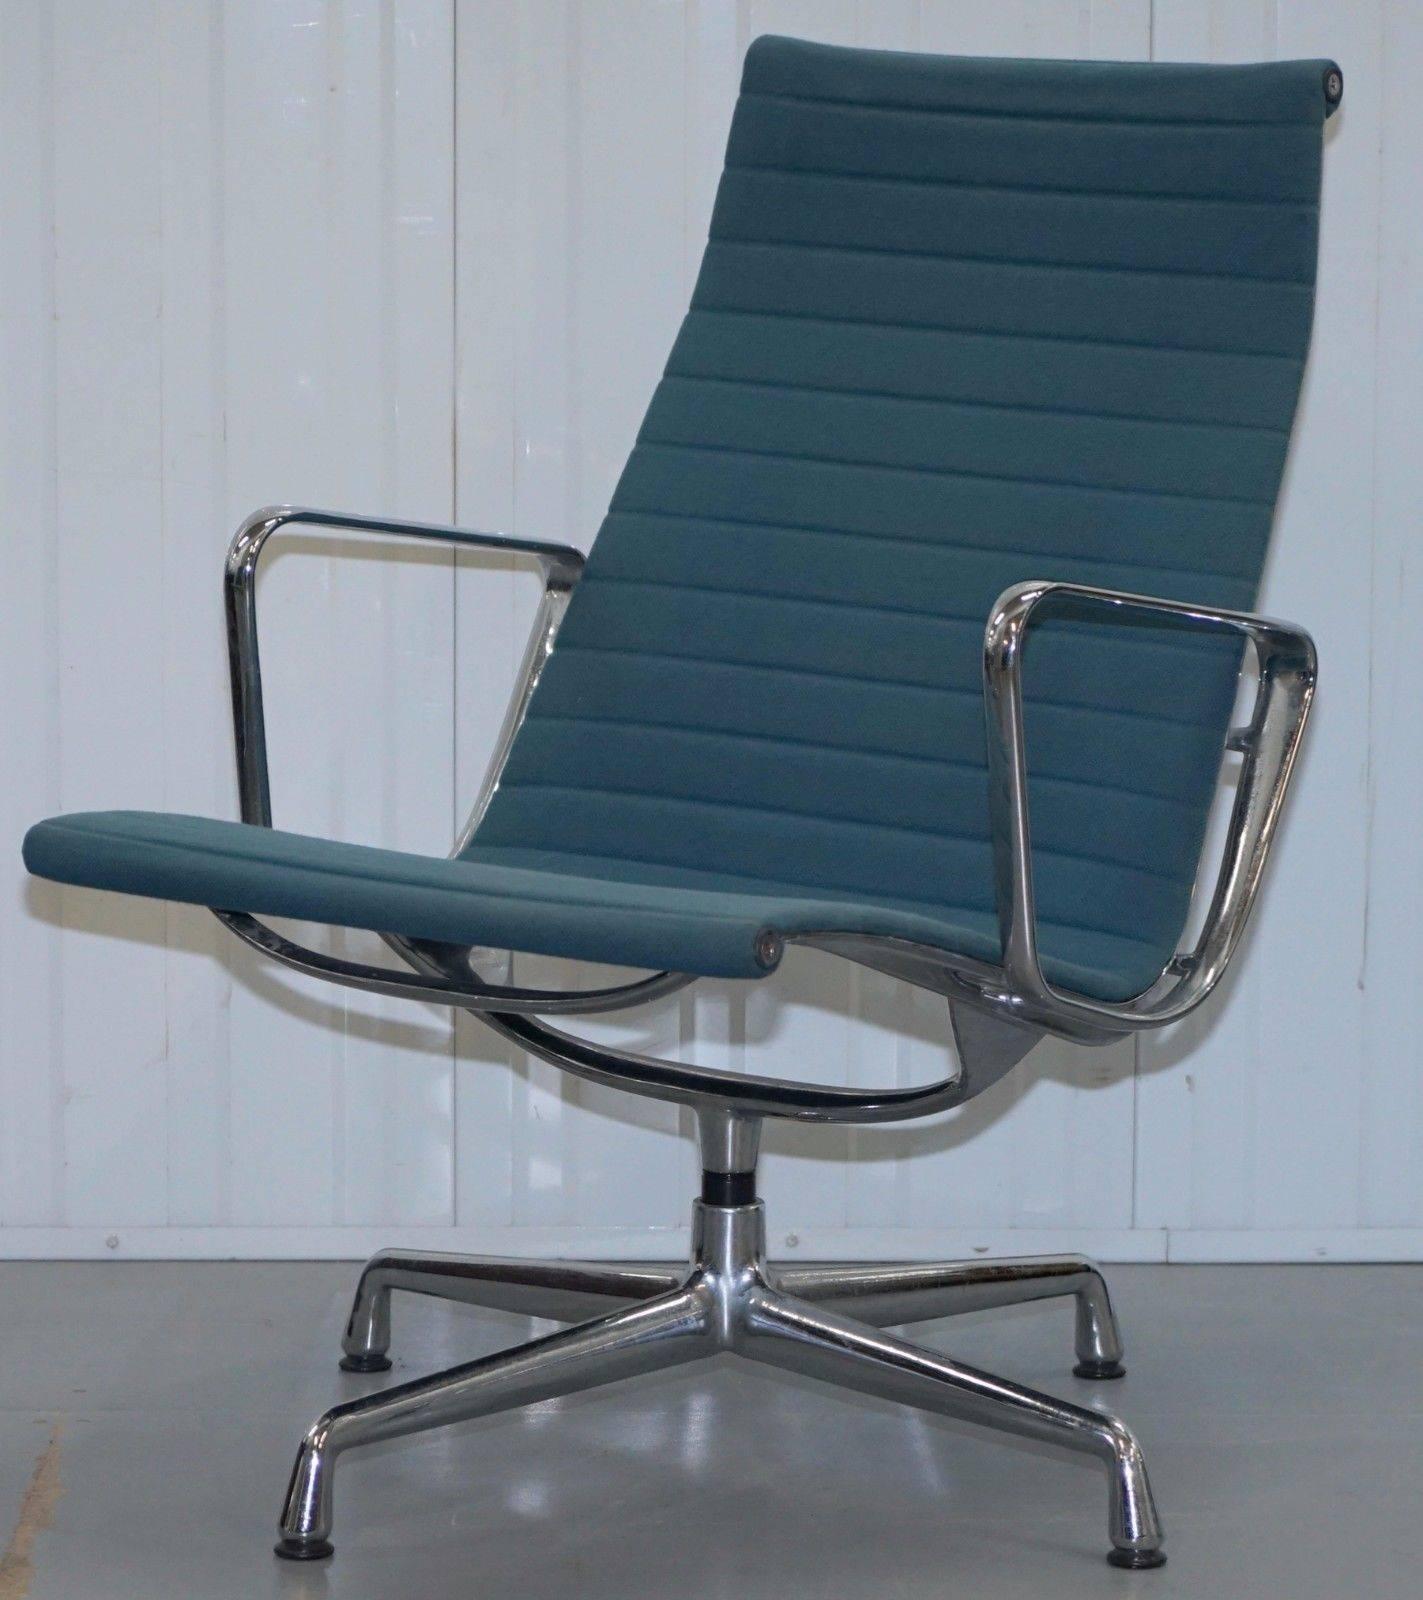 We are delighted to offer for sale one of three this lovely Charles Eames by Vitra EA116 swivel hopsack lounge armchairs RRP £2095

This chair is part of suite, the auction is for one and the other two are in separate auctions under my other